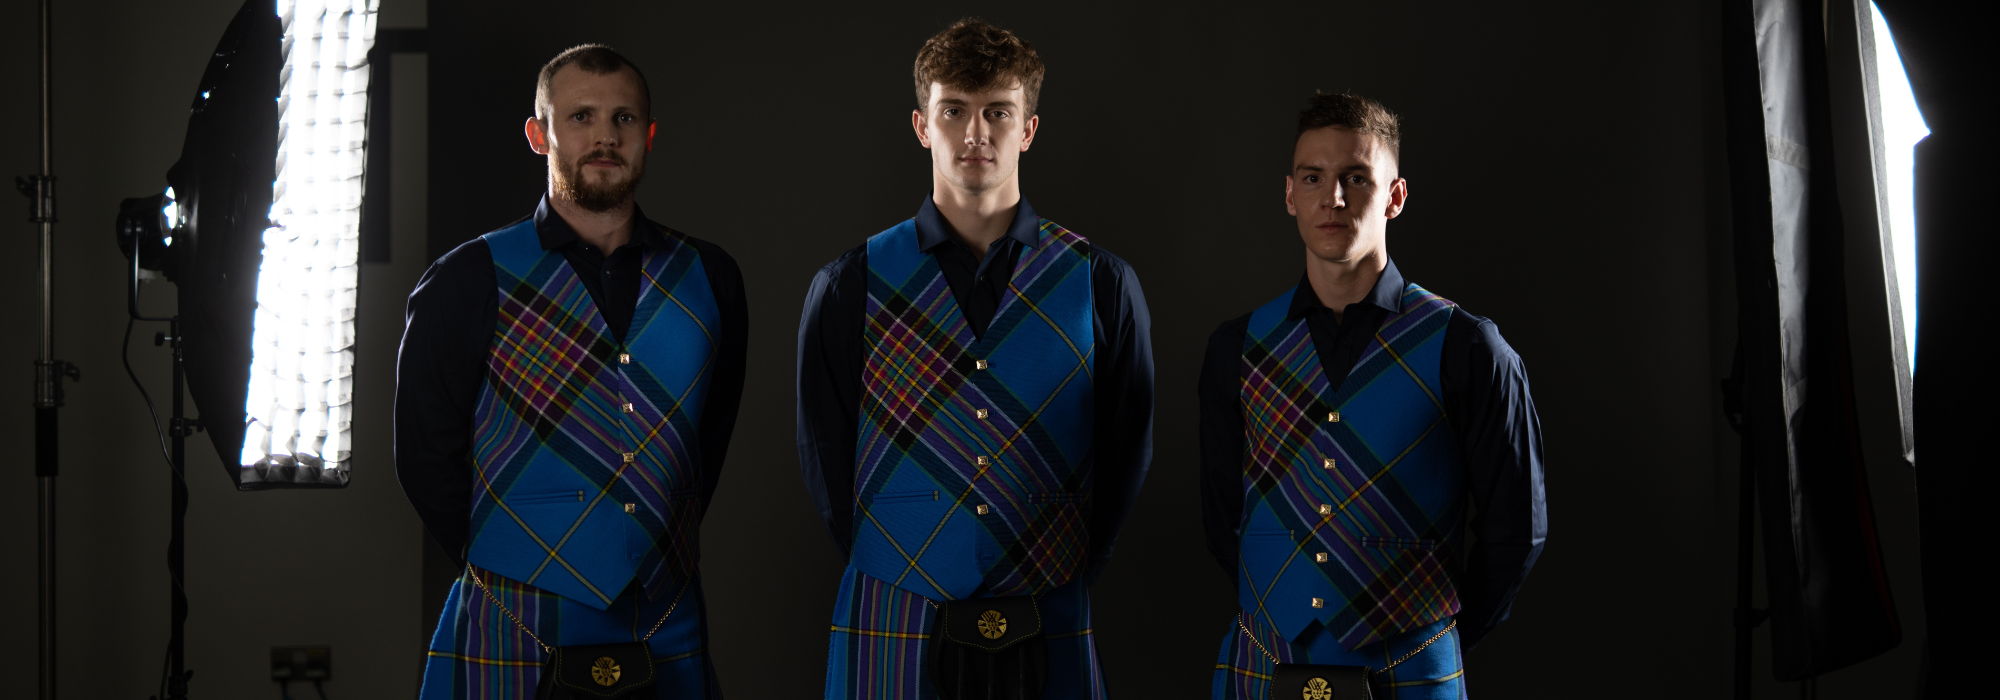 Scotland to don traditional tartan outfits at Birmingham 2022 Opening Ceremony